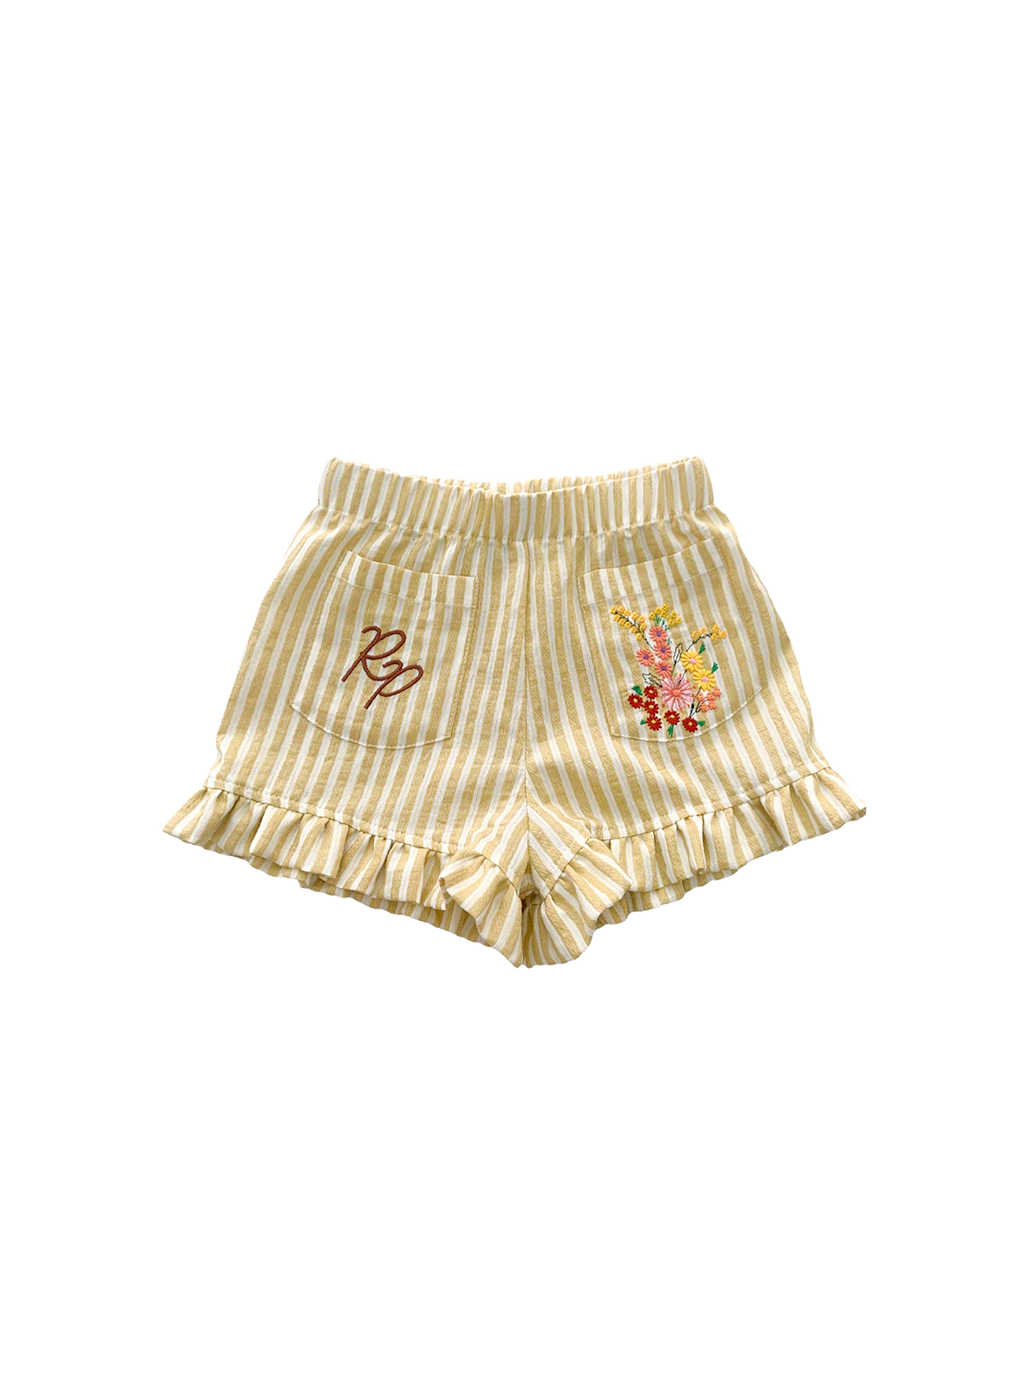 Meadow shorts with a frill